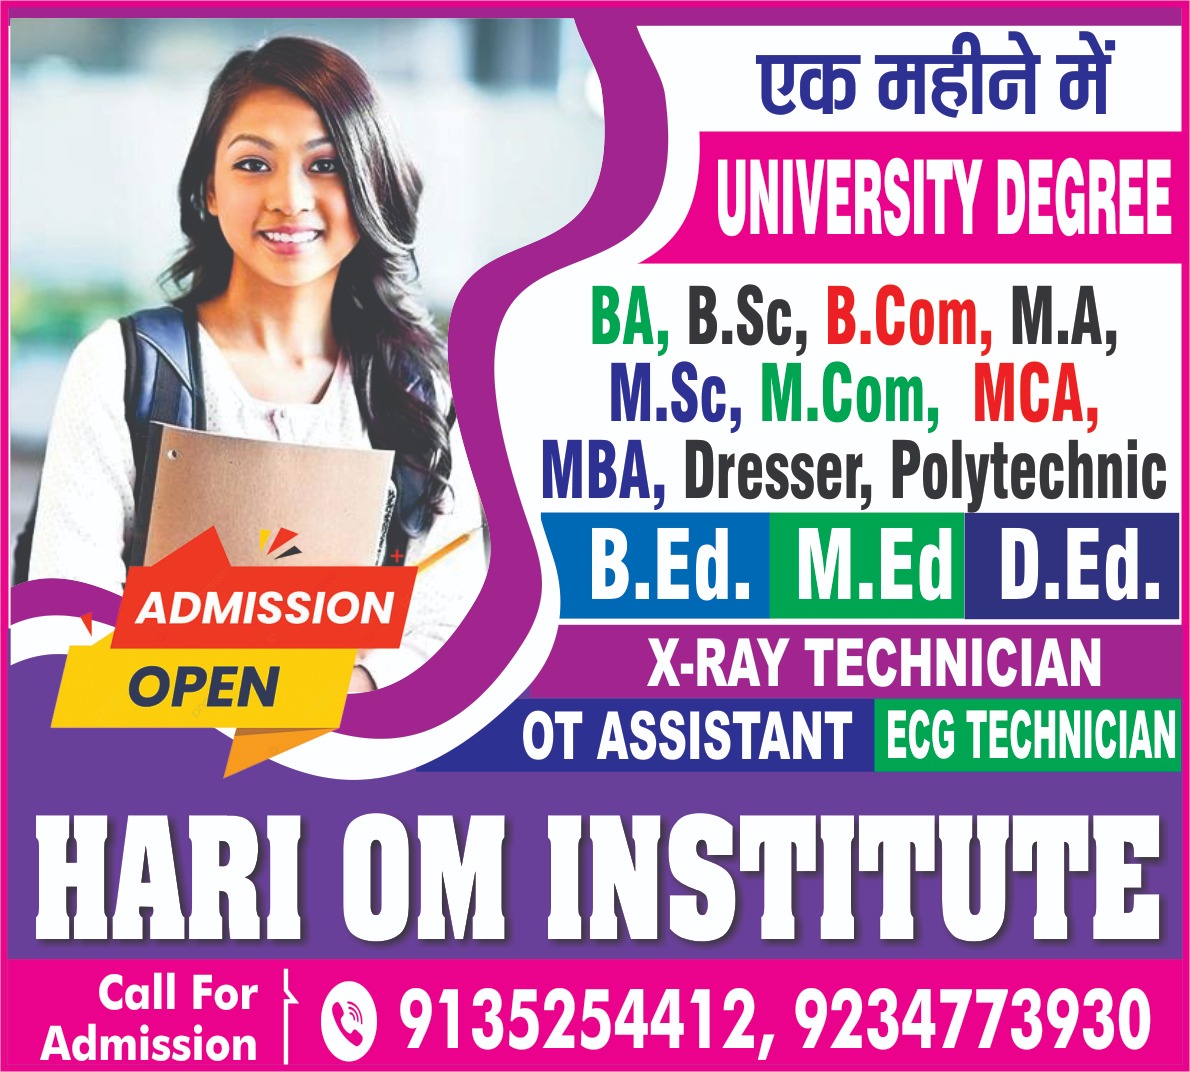 THE GLOBAL OPEN UNIVERSITY STUDY CENTRE IN BHAGALPUR